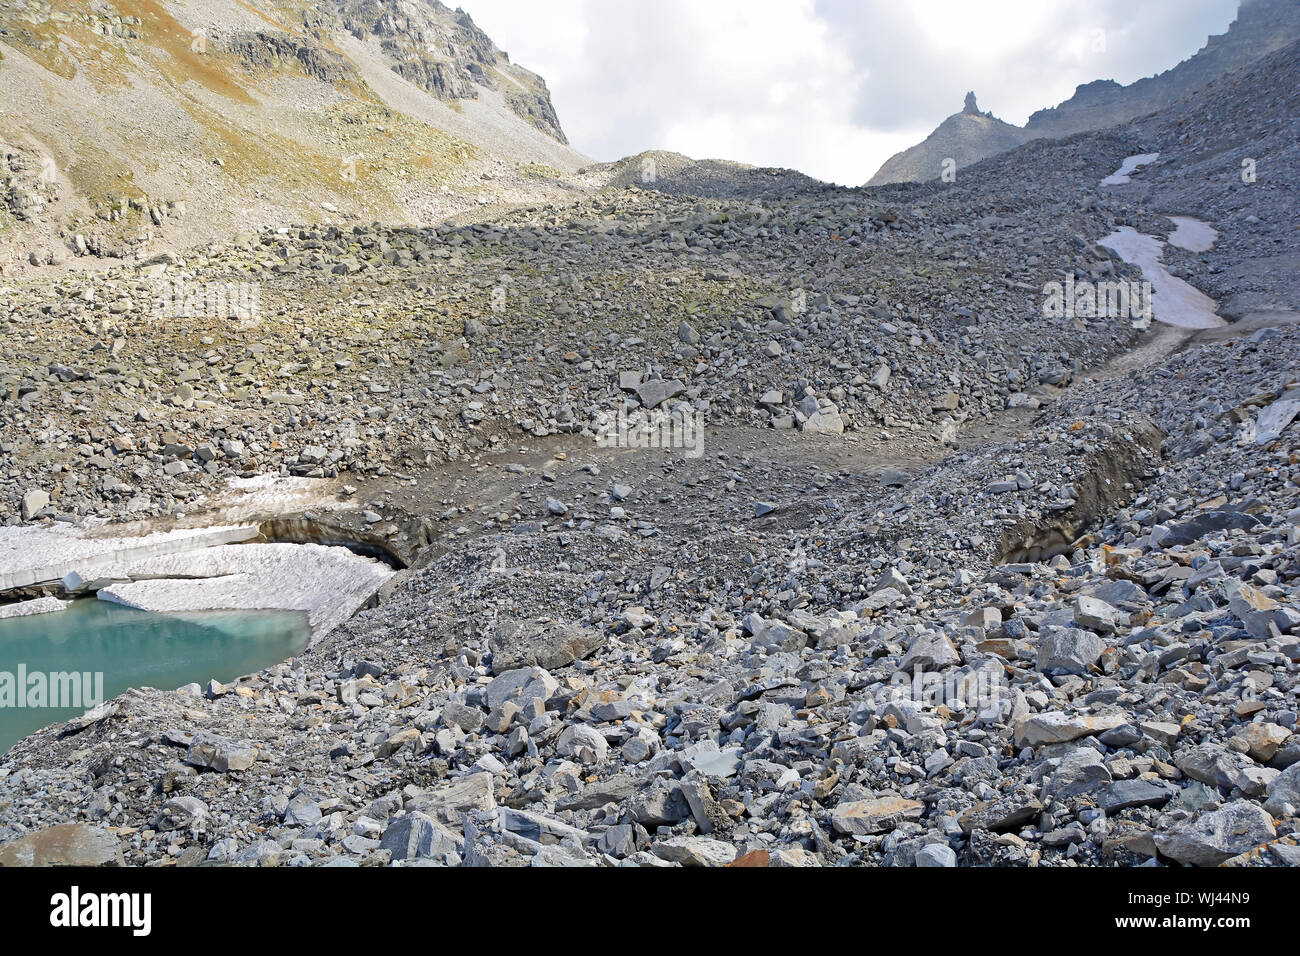 The Chriegalp Pass on the border between Switzerland and Italy with a glacial lake and small icebergs breaking away from the melting glacier as the cl Stock Photo